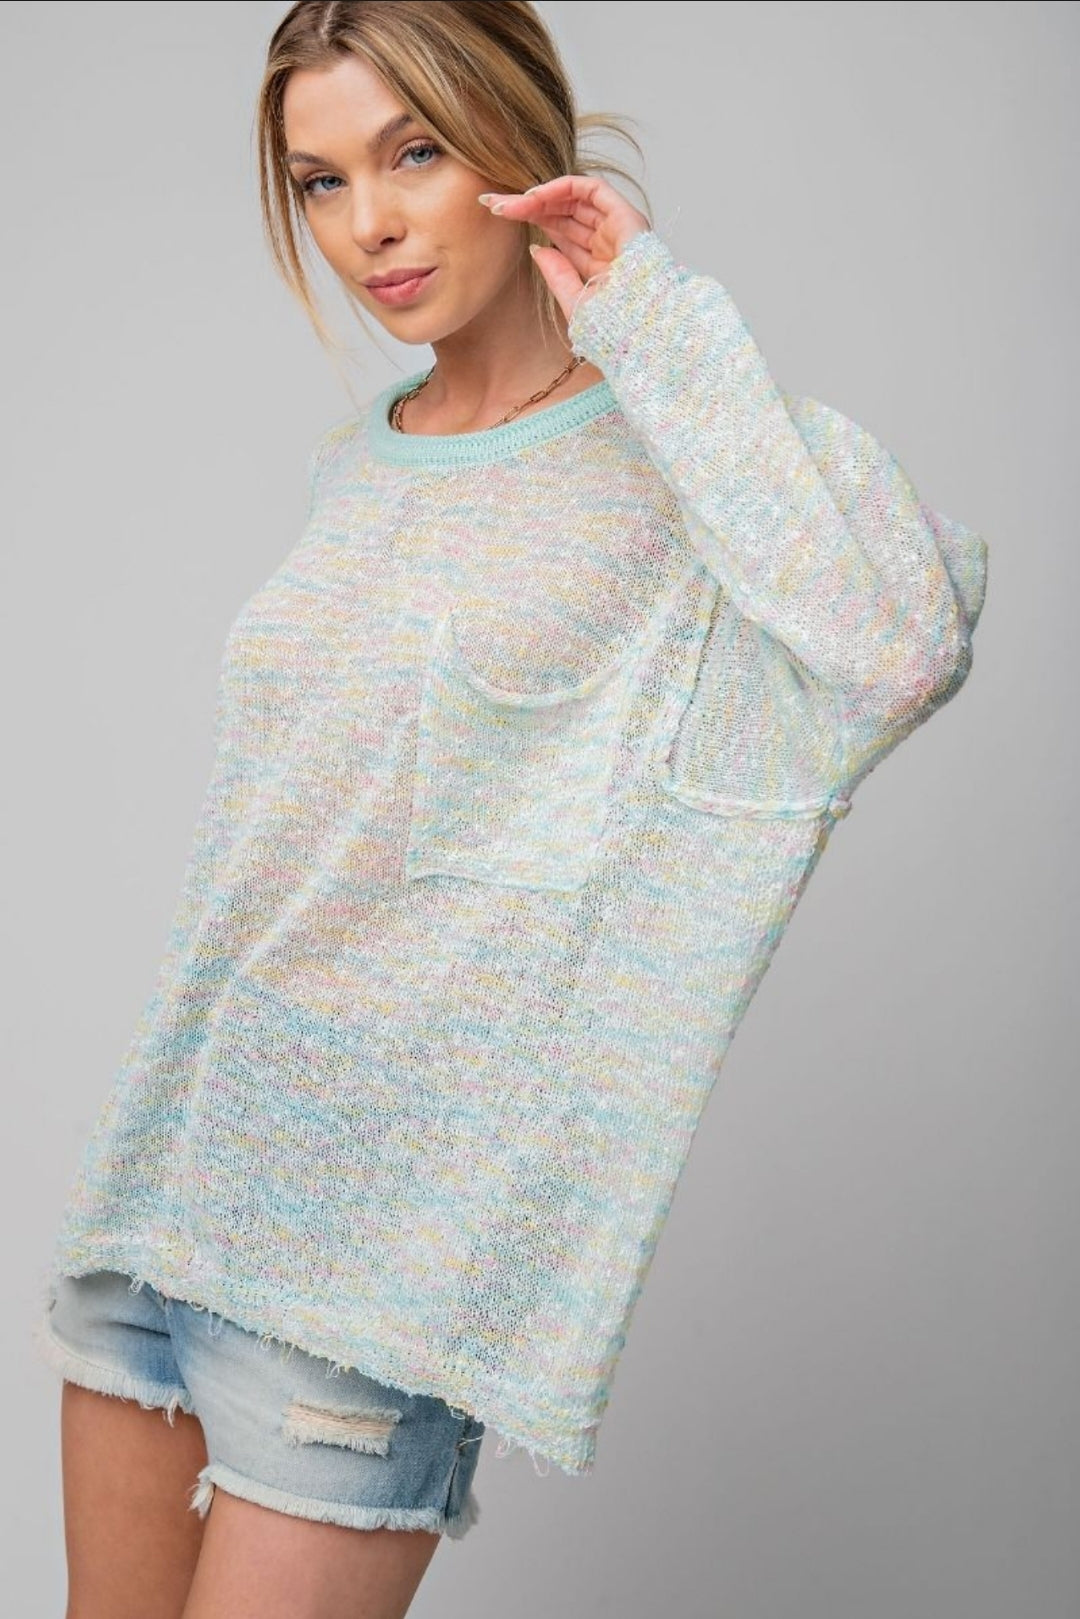 Chessley Light Weight Knit Sweater (Multi Color)